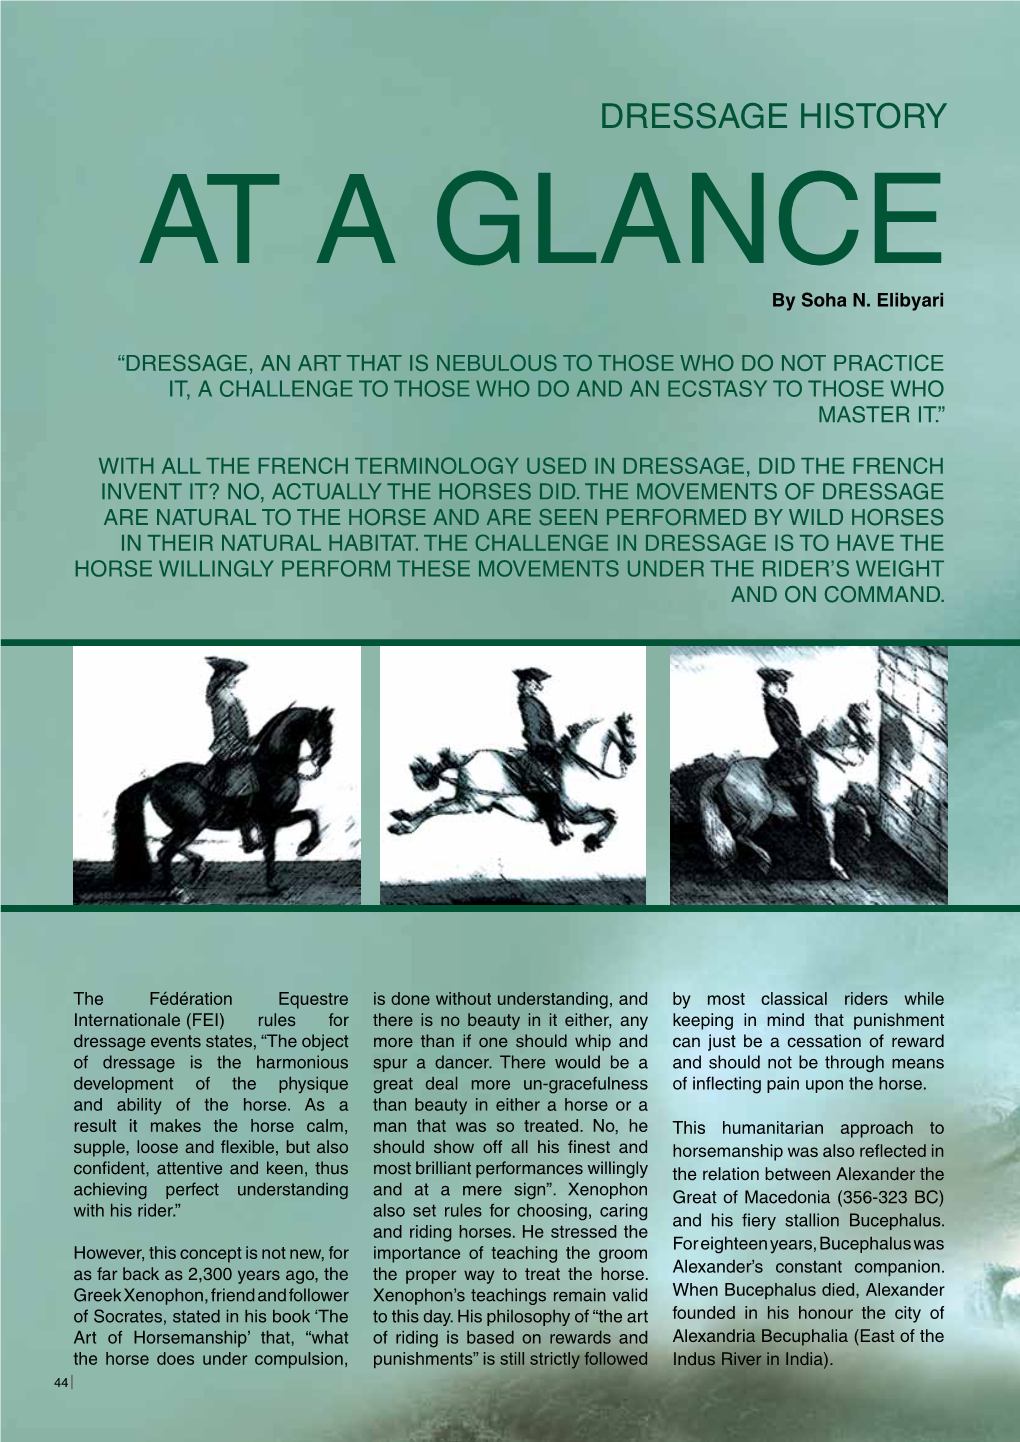 DRESSAGE HISTORY at a GLANCE by Soha N